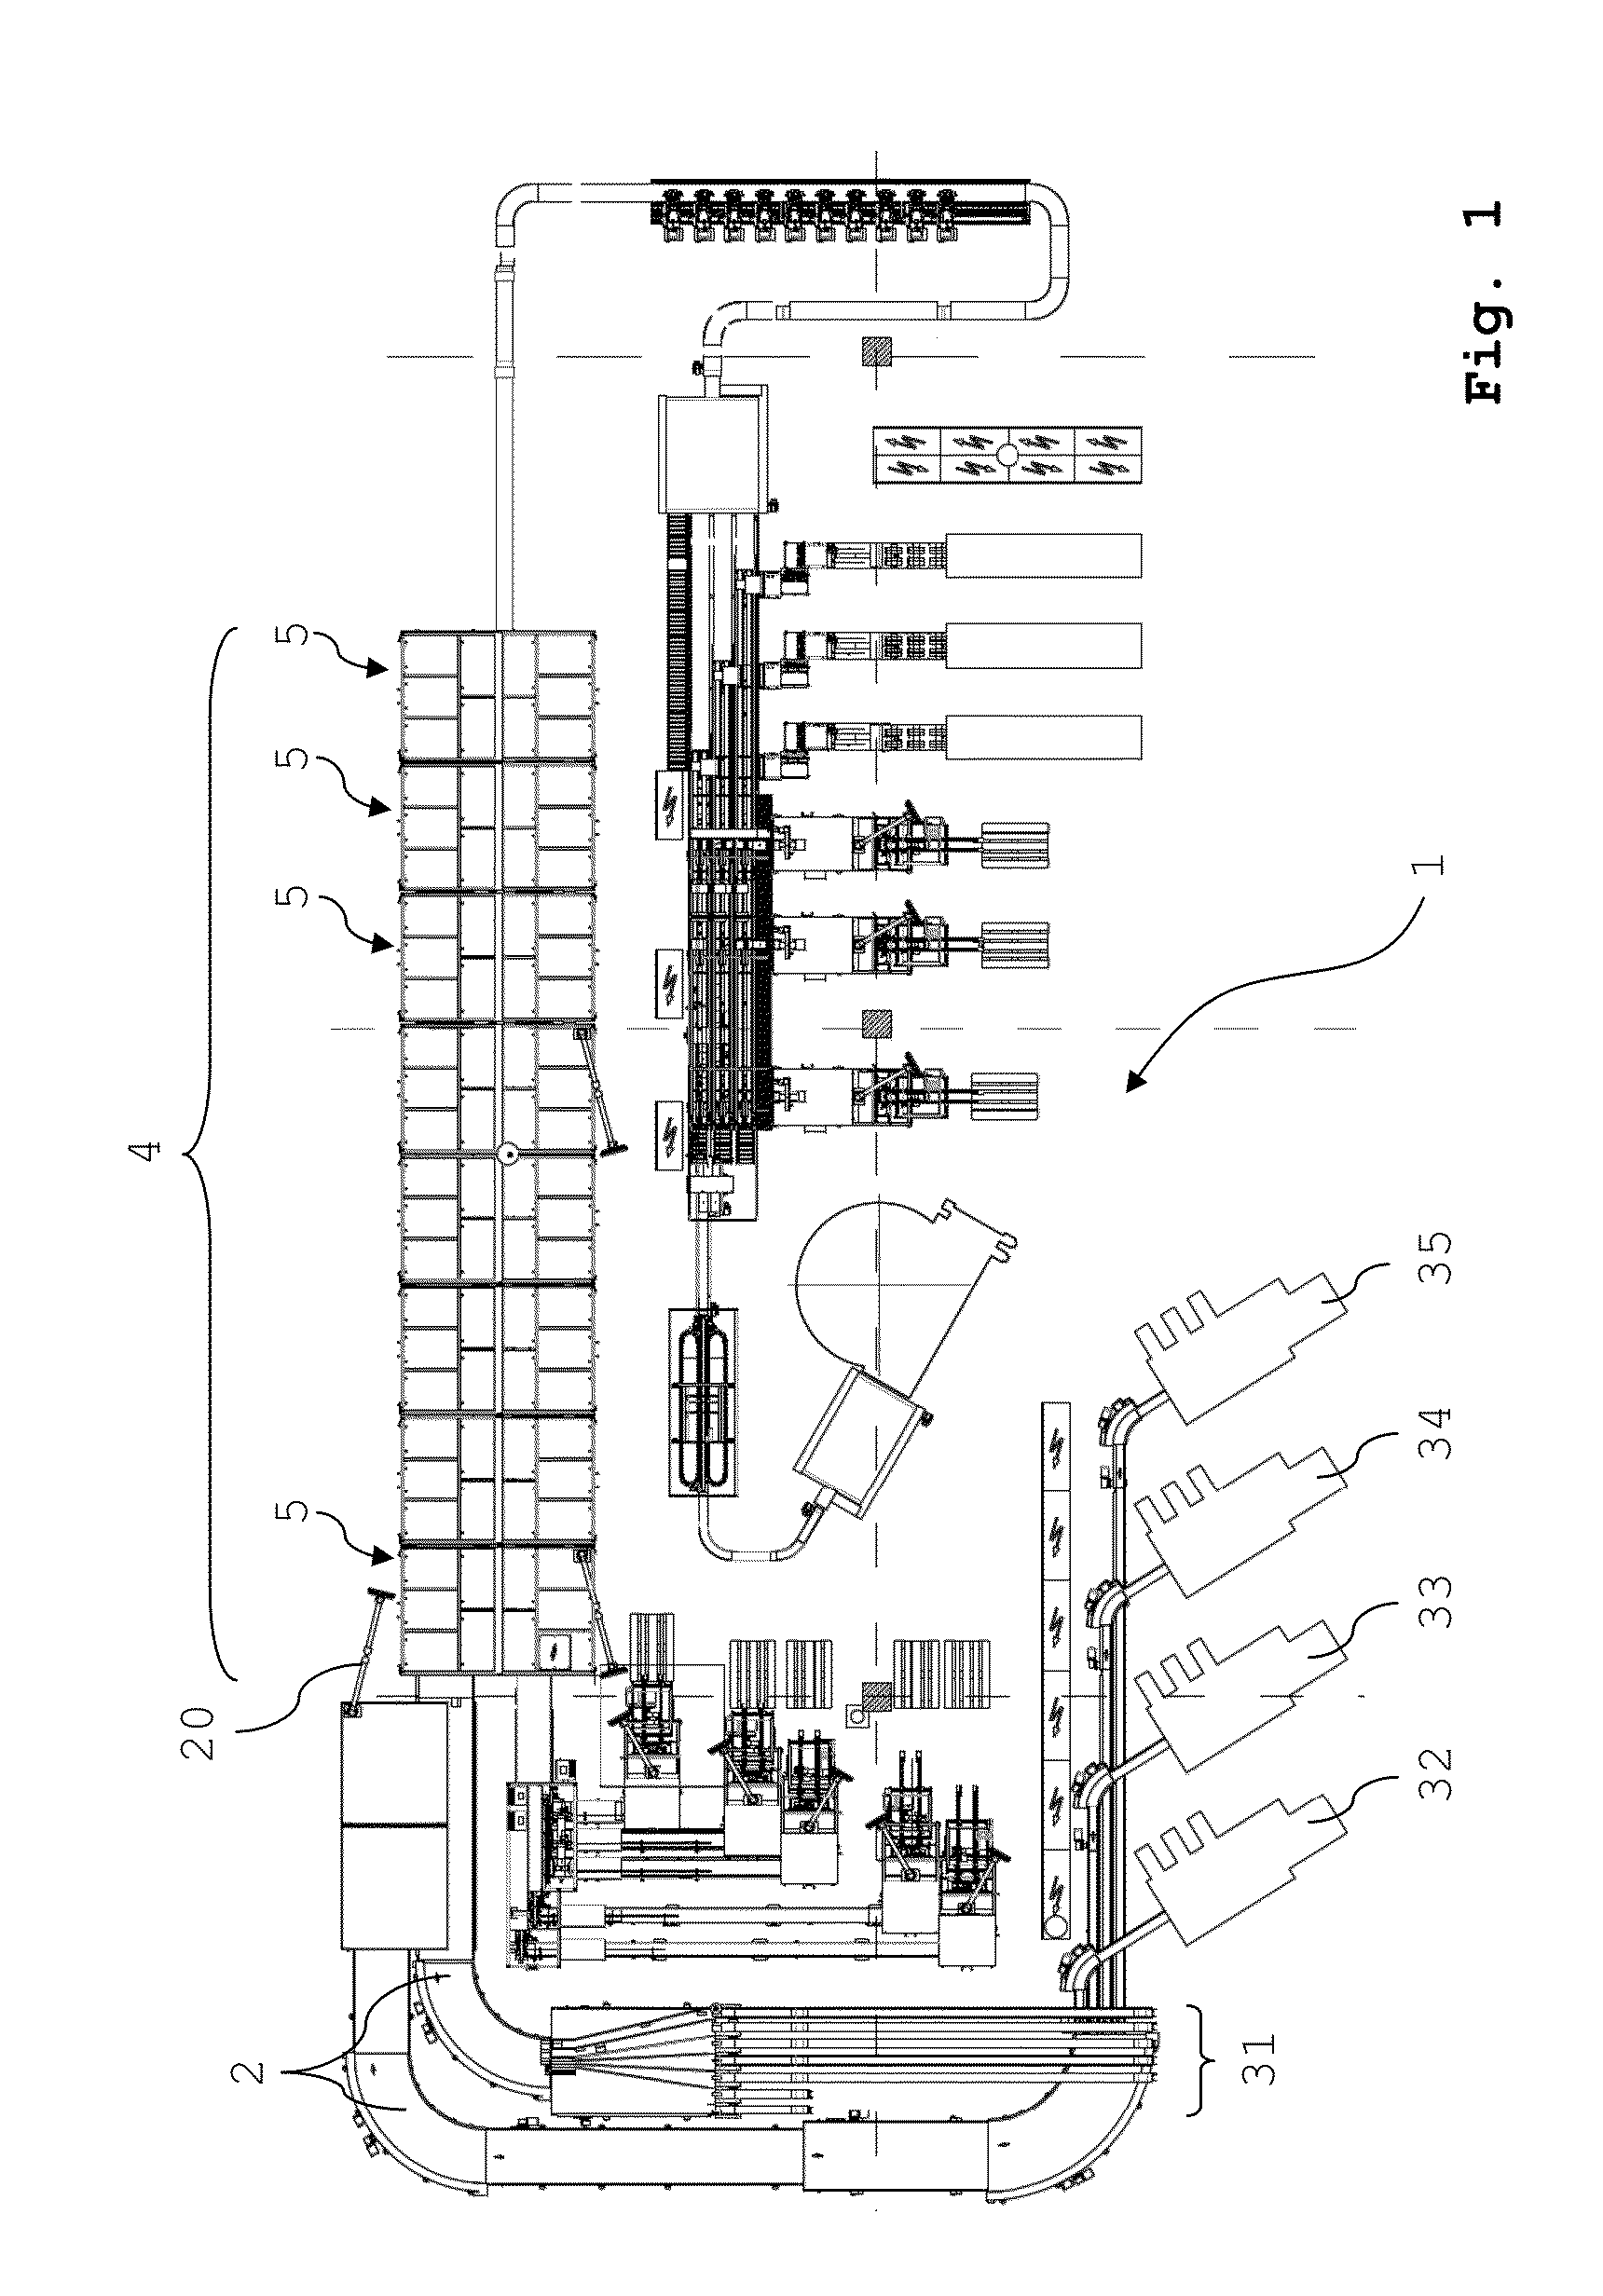 Method and Packaging Plant for Placing Product Packages into Shipment Containers